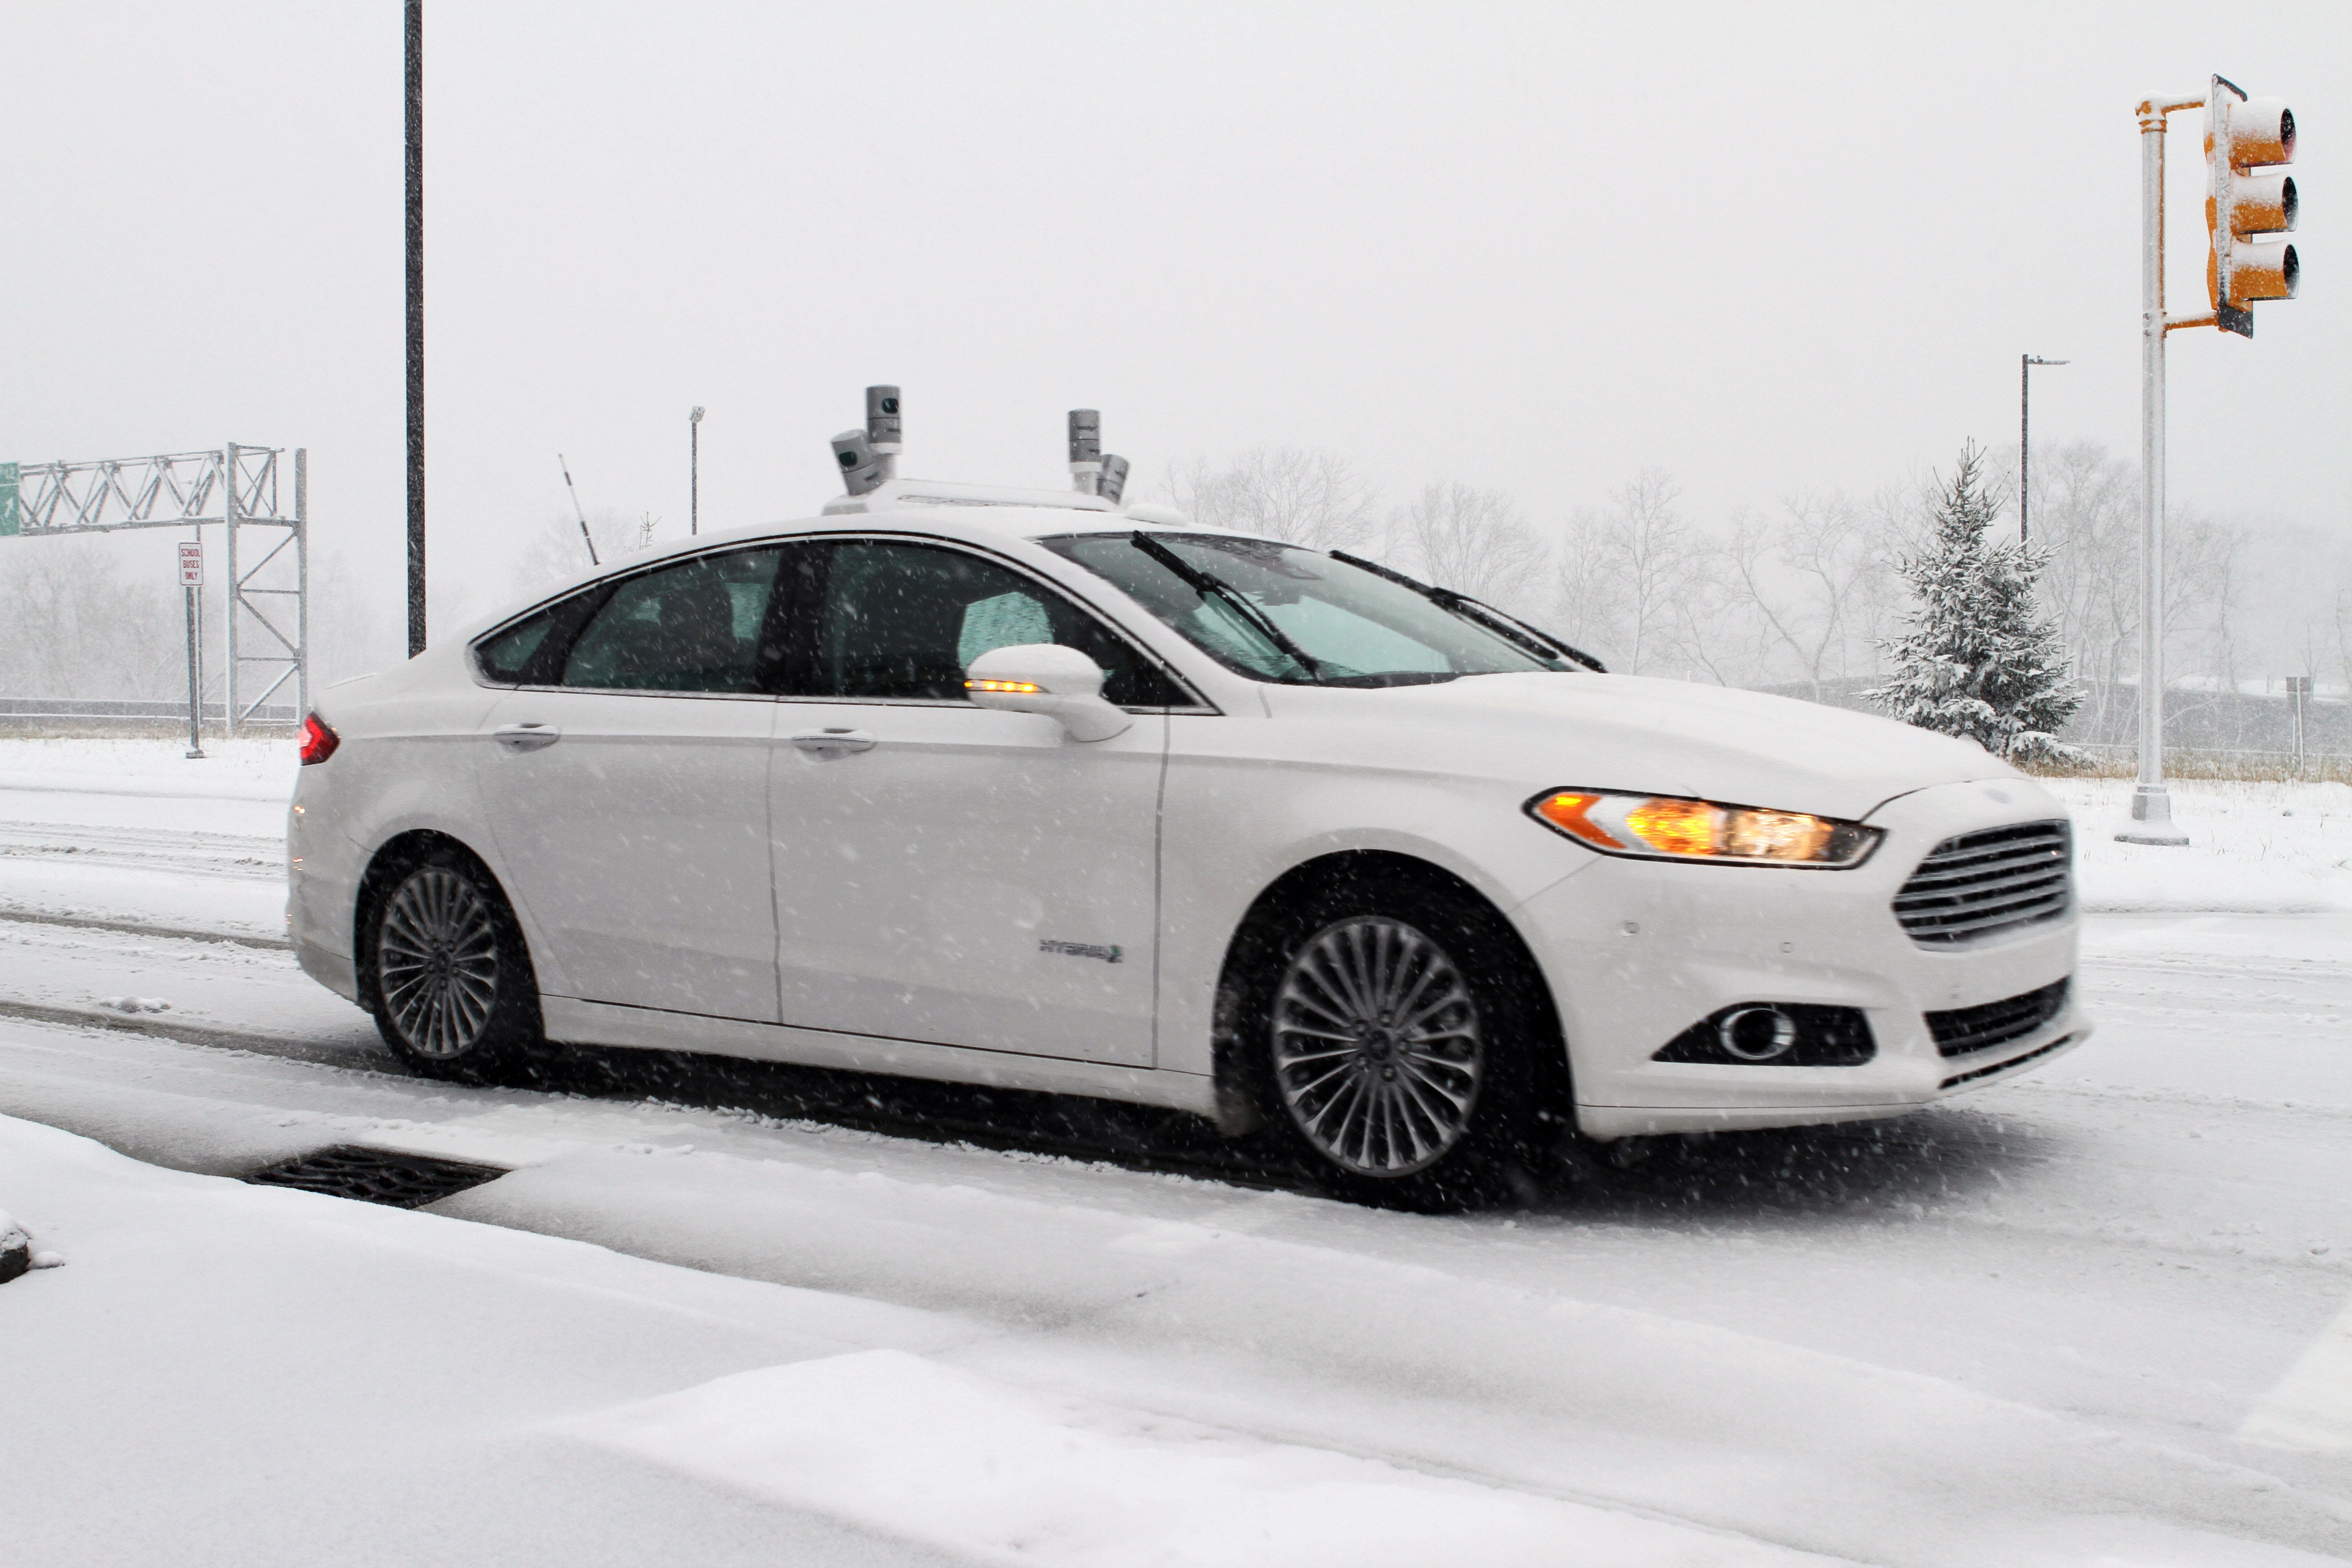 ford snow self-driving